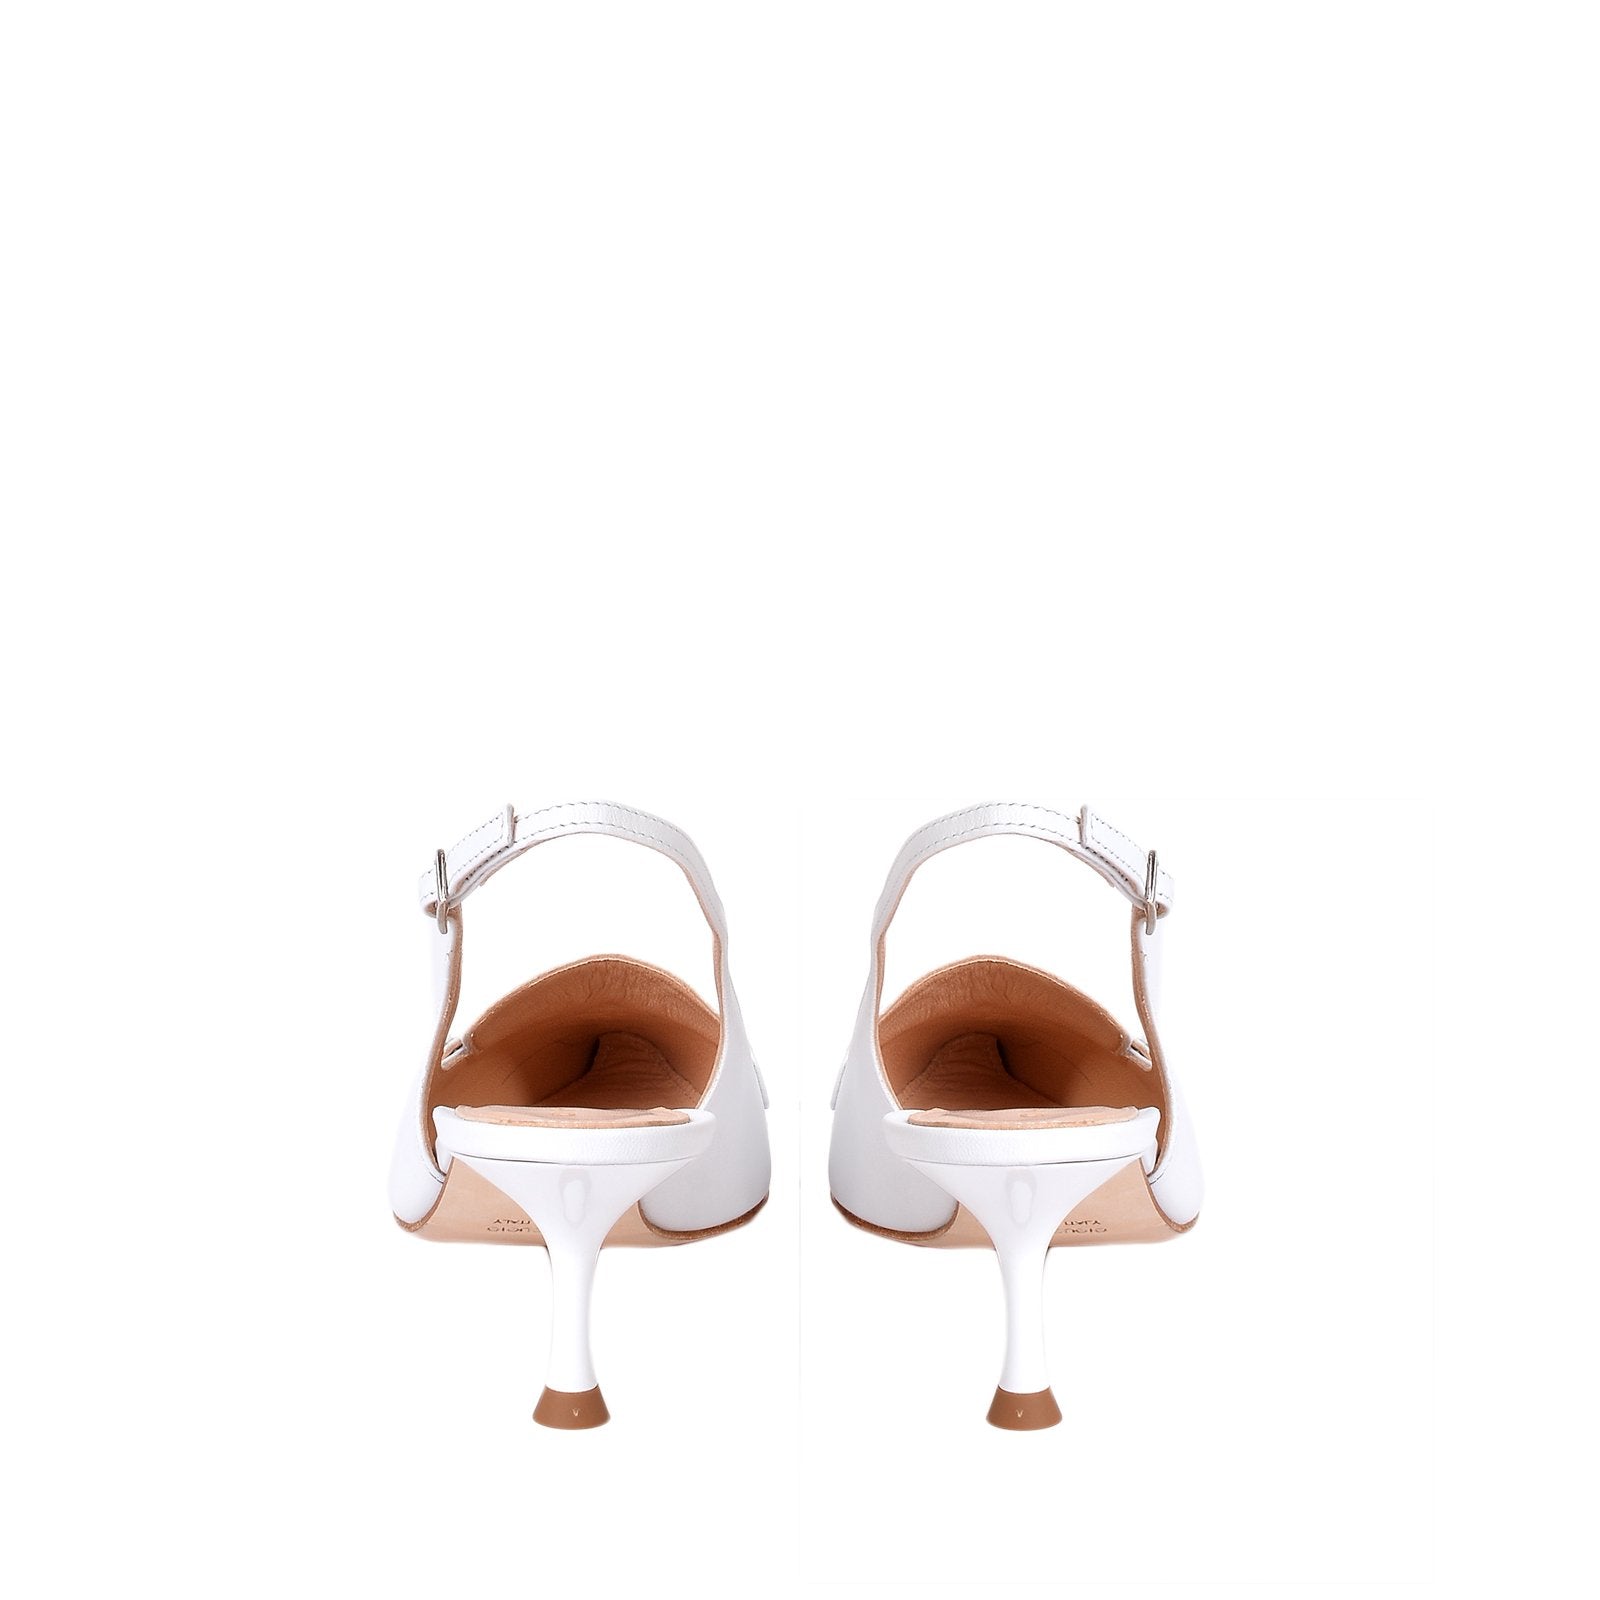 Capretto Sling Back Shoes In White Heels 1002/White - 7